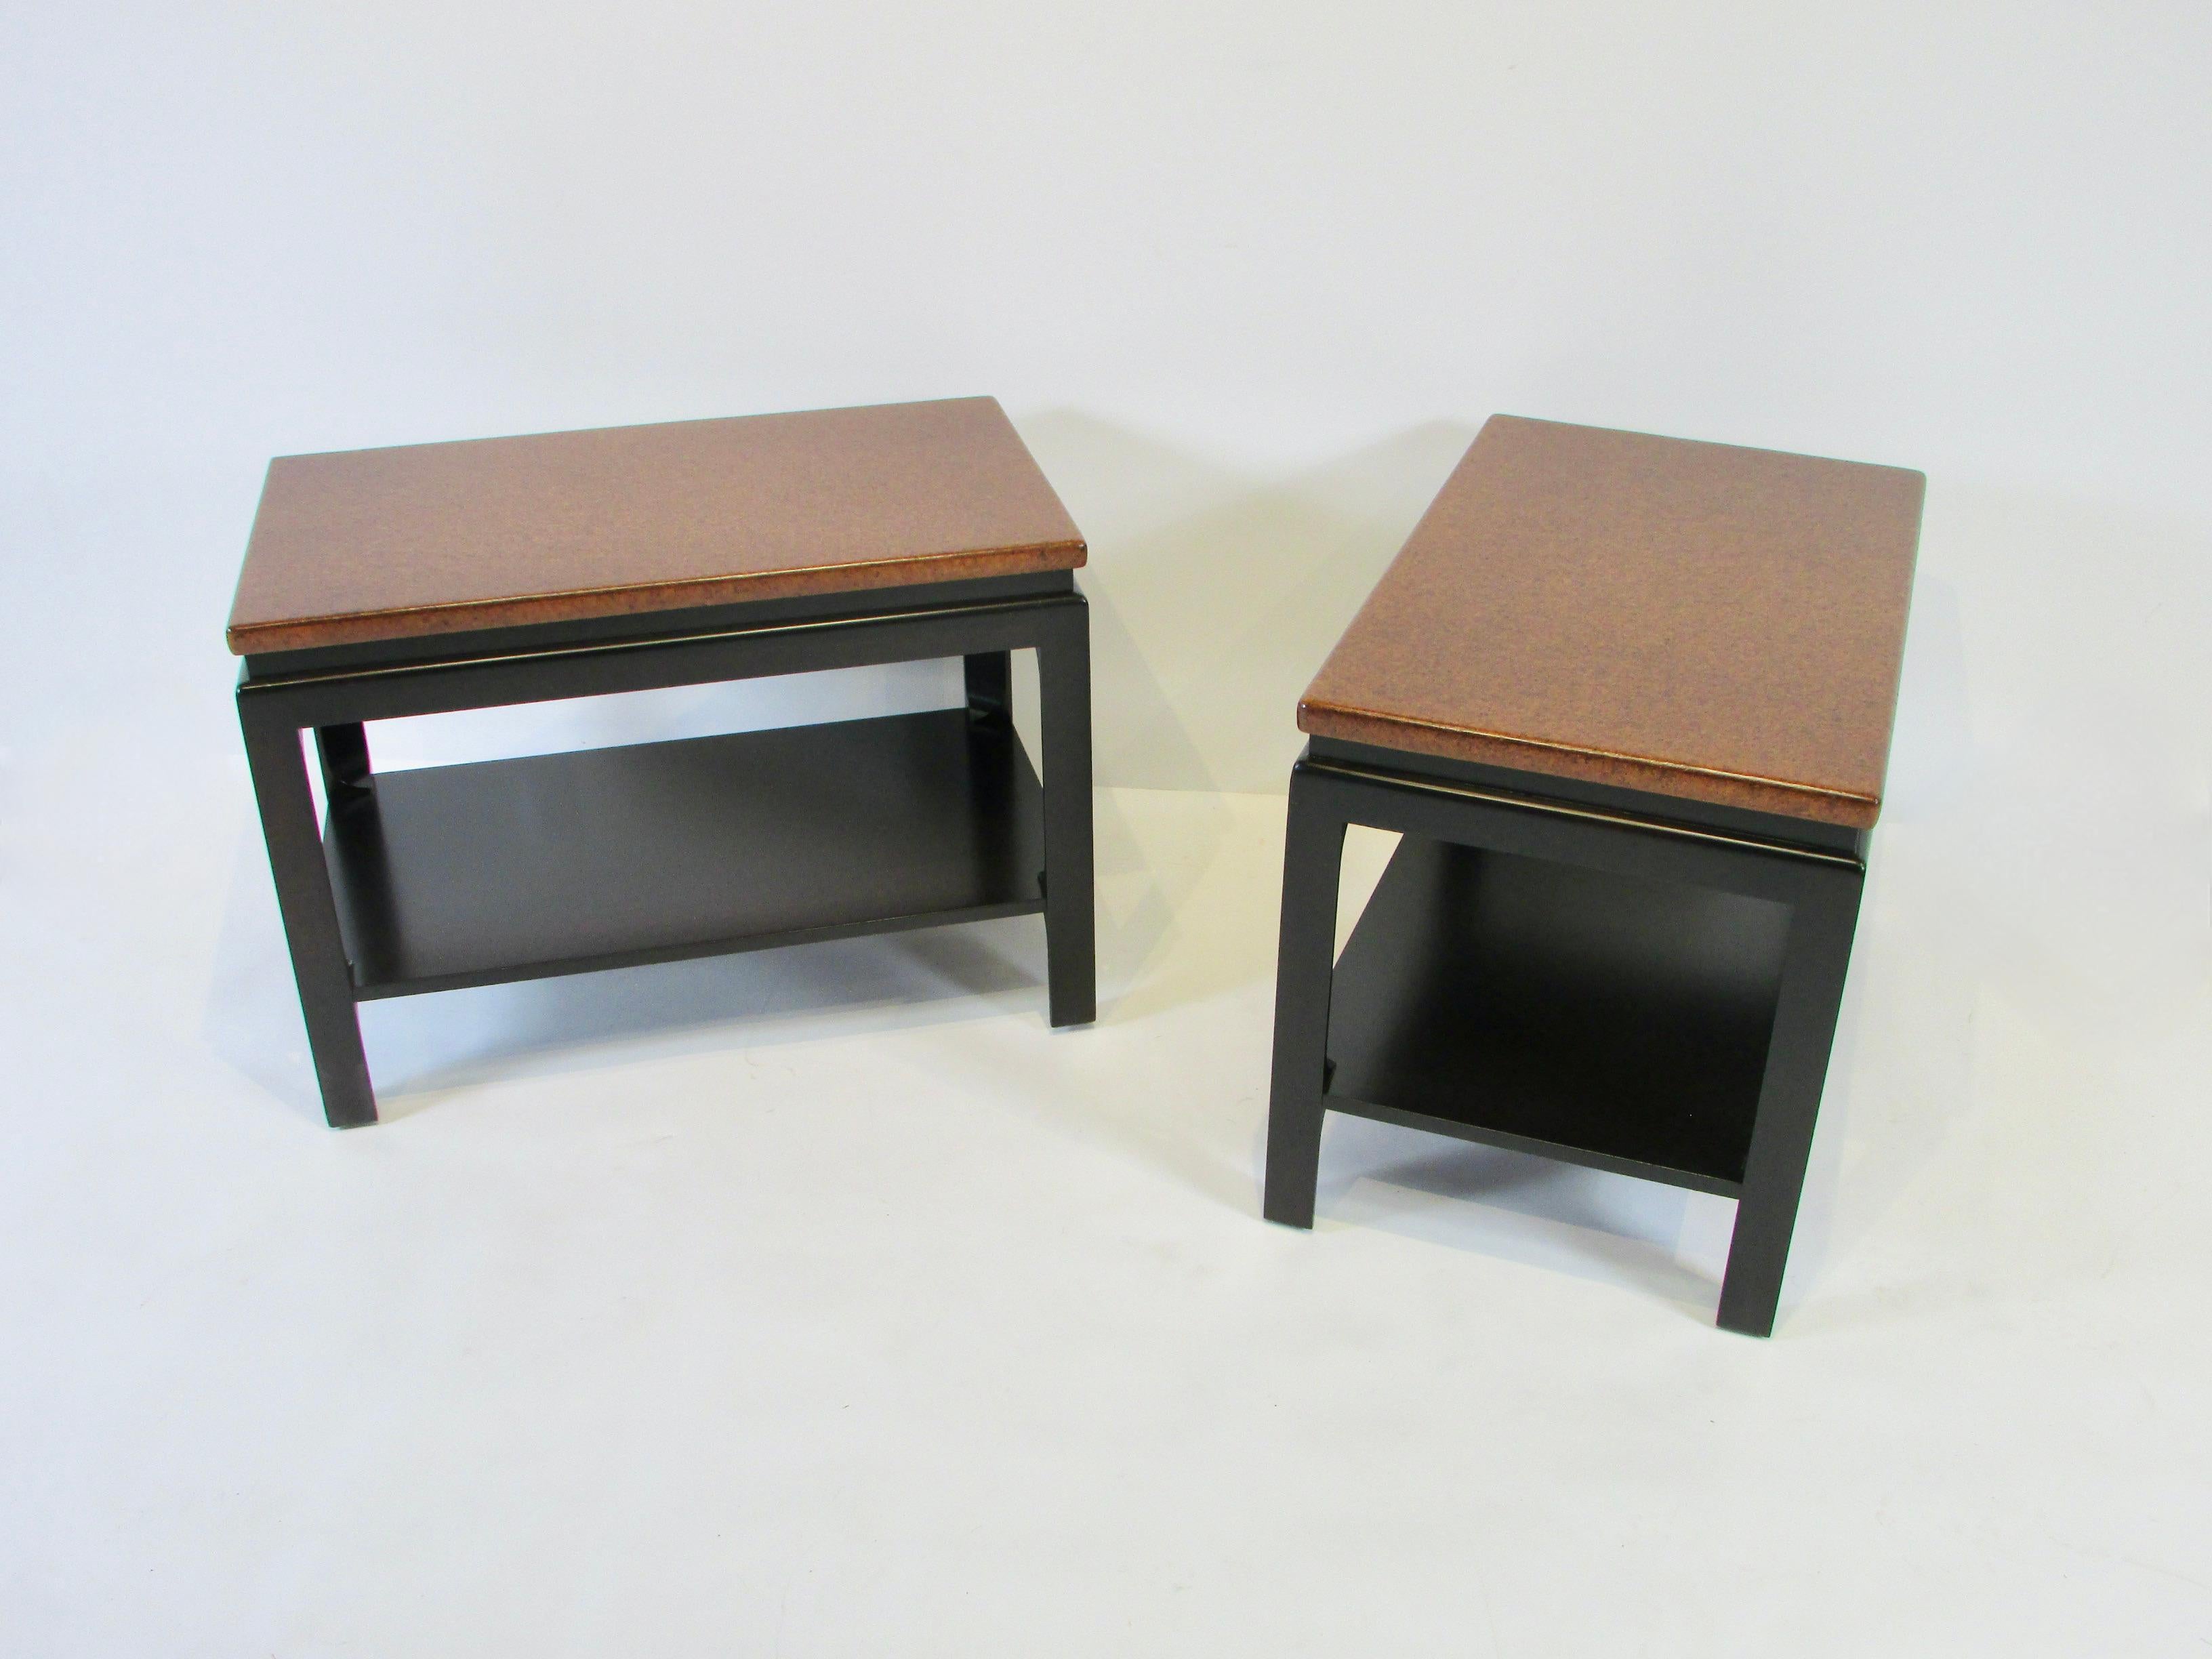 Classic Paul Frankl cork top side or end tables. Dark finish base with lower tier shelf below natural tone cork tops.